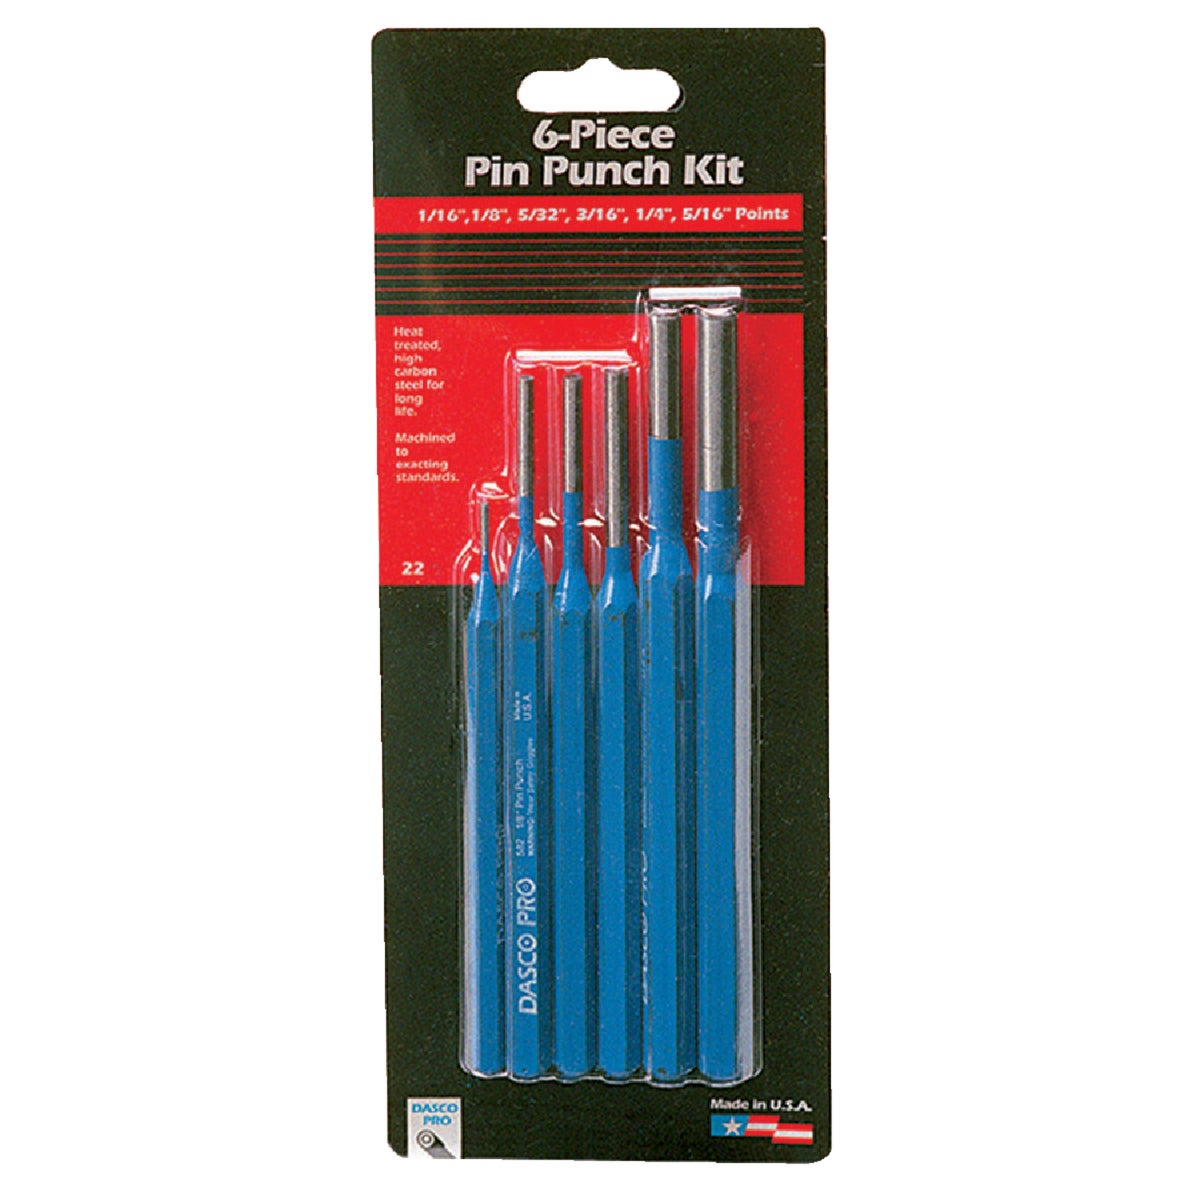 Item 366226, Mayhew's Pin Punches are used to drive out and remove already loosened pins